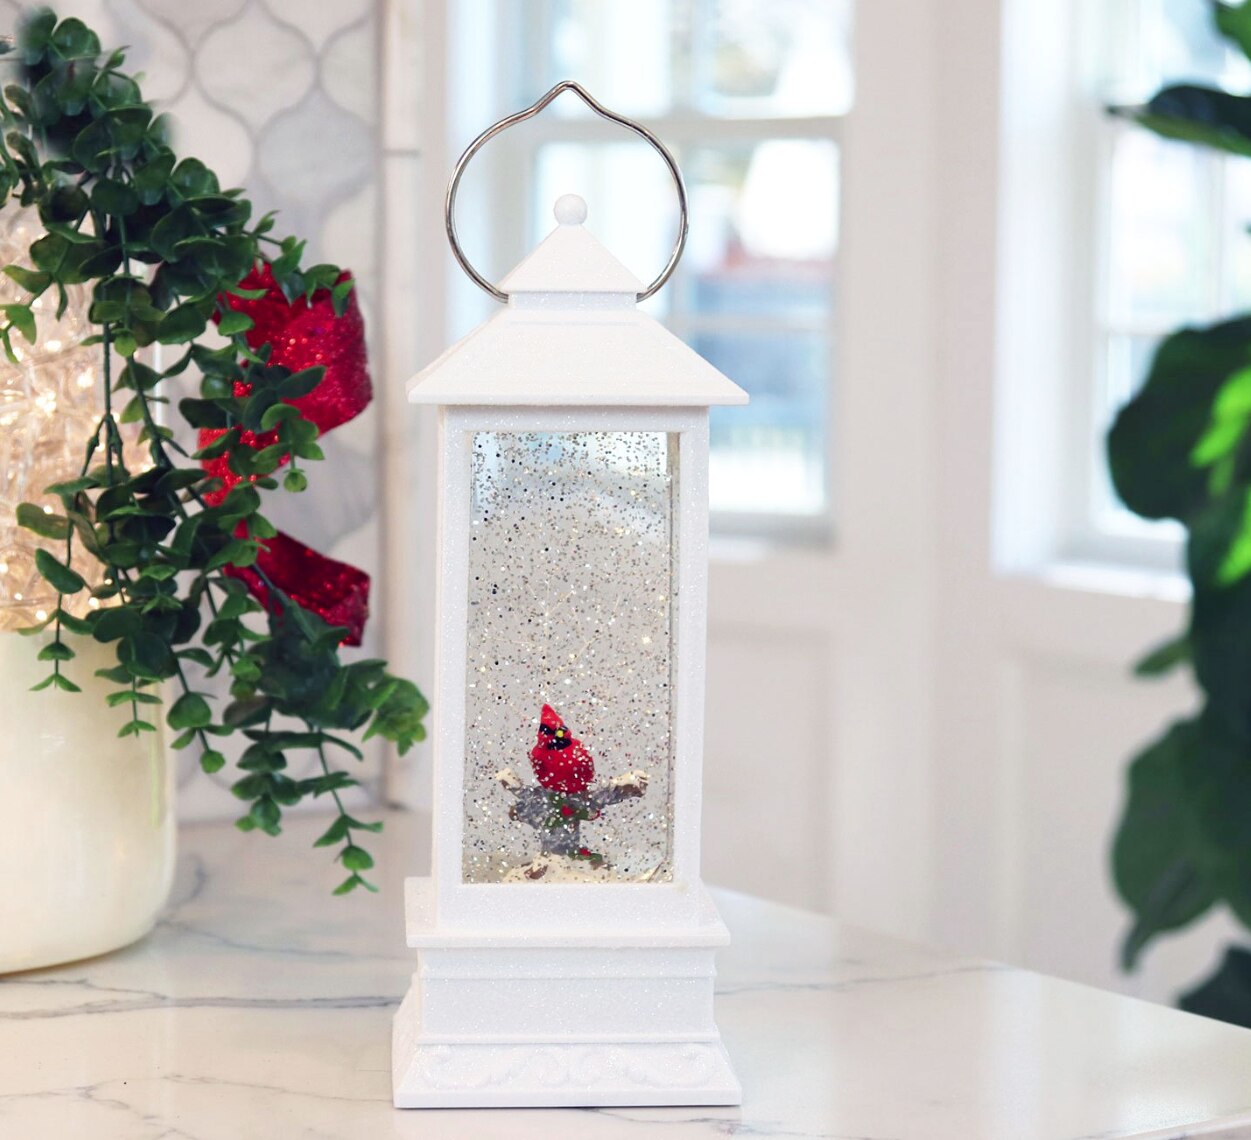 Personalized Memorial Lantern Cardinal with LED Lit Confetti Snow Dome.